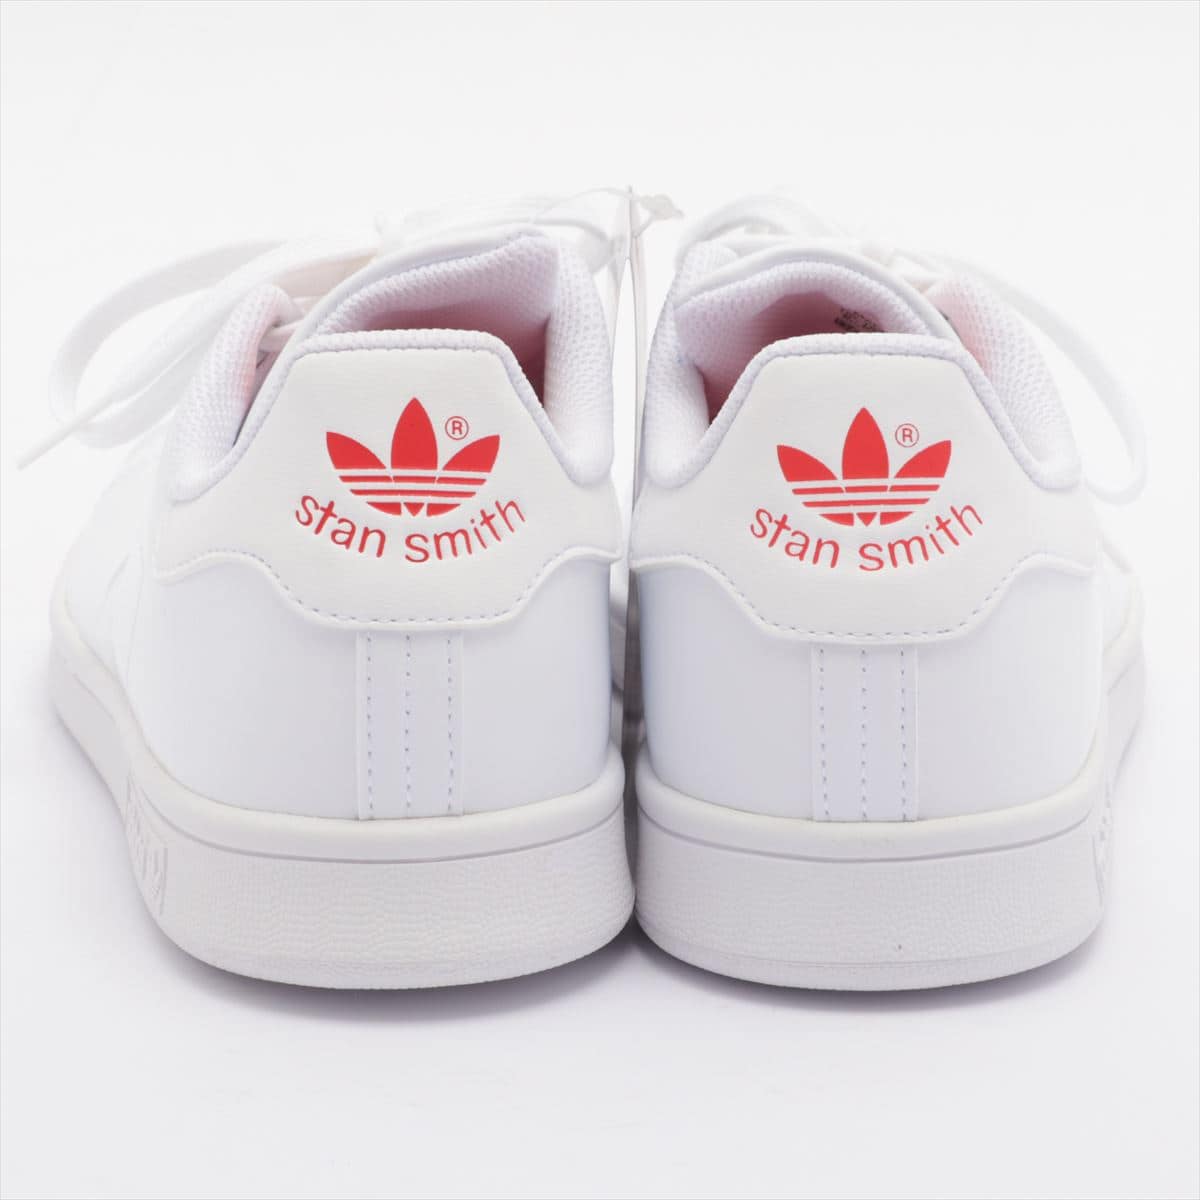 Adidas Faux leather Sneakers JPN24.5 Ladies' Red x white FY4481 Stan Smith Insoles outside